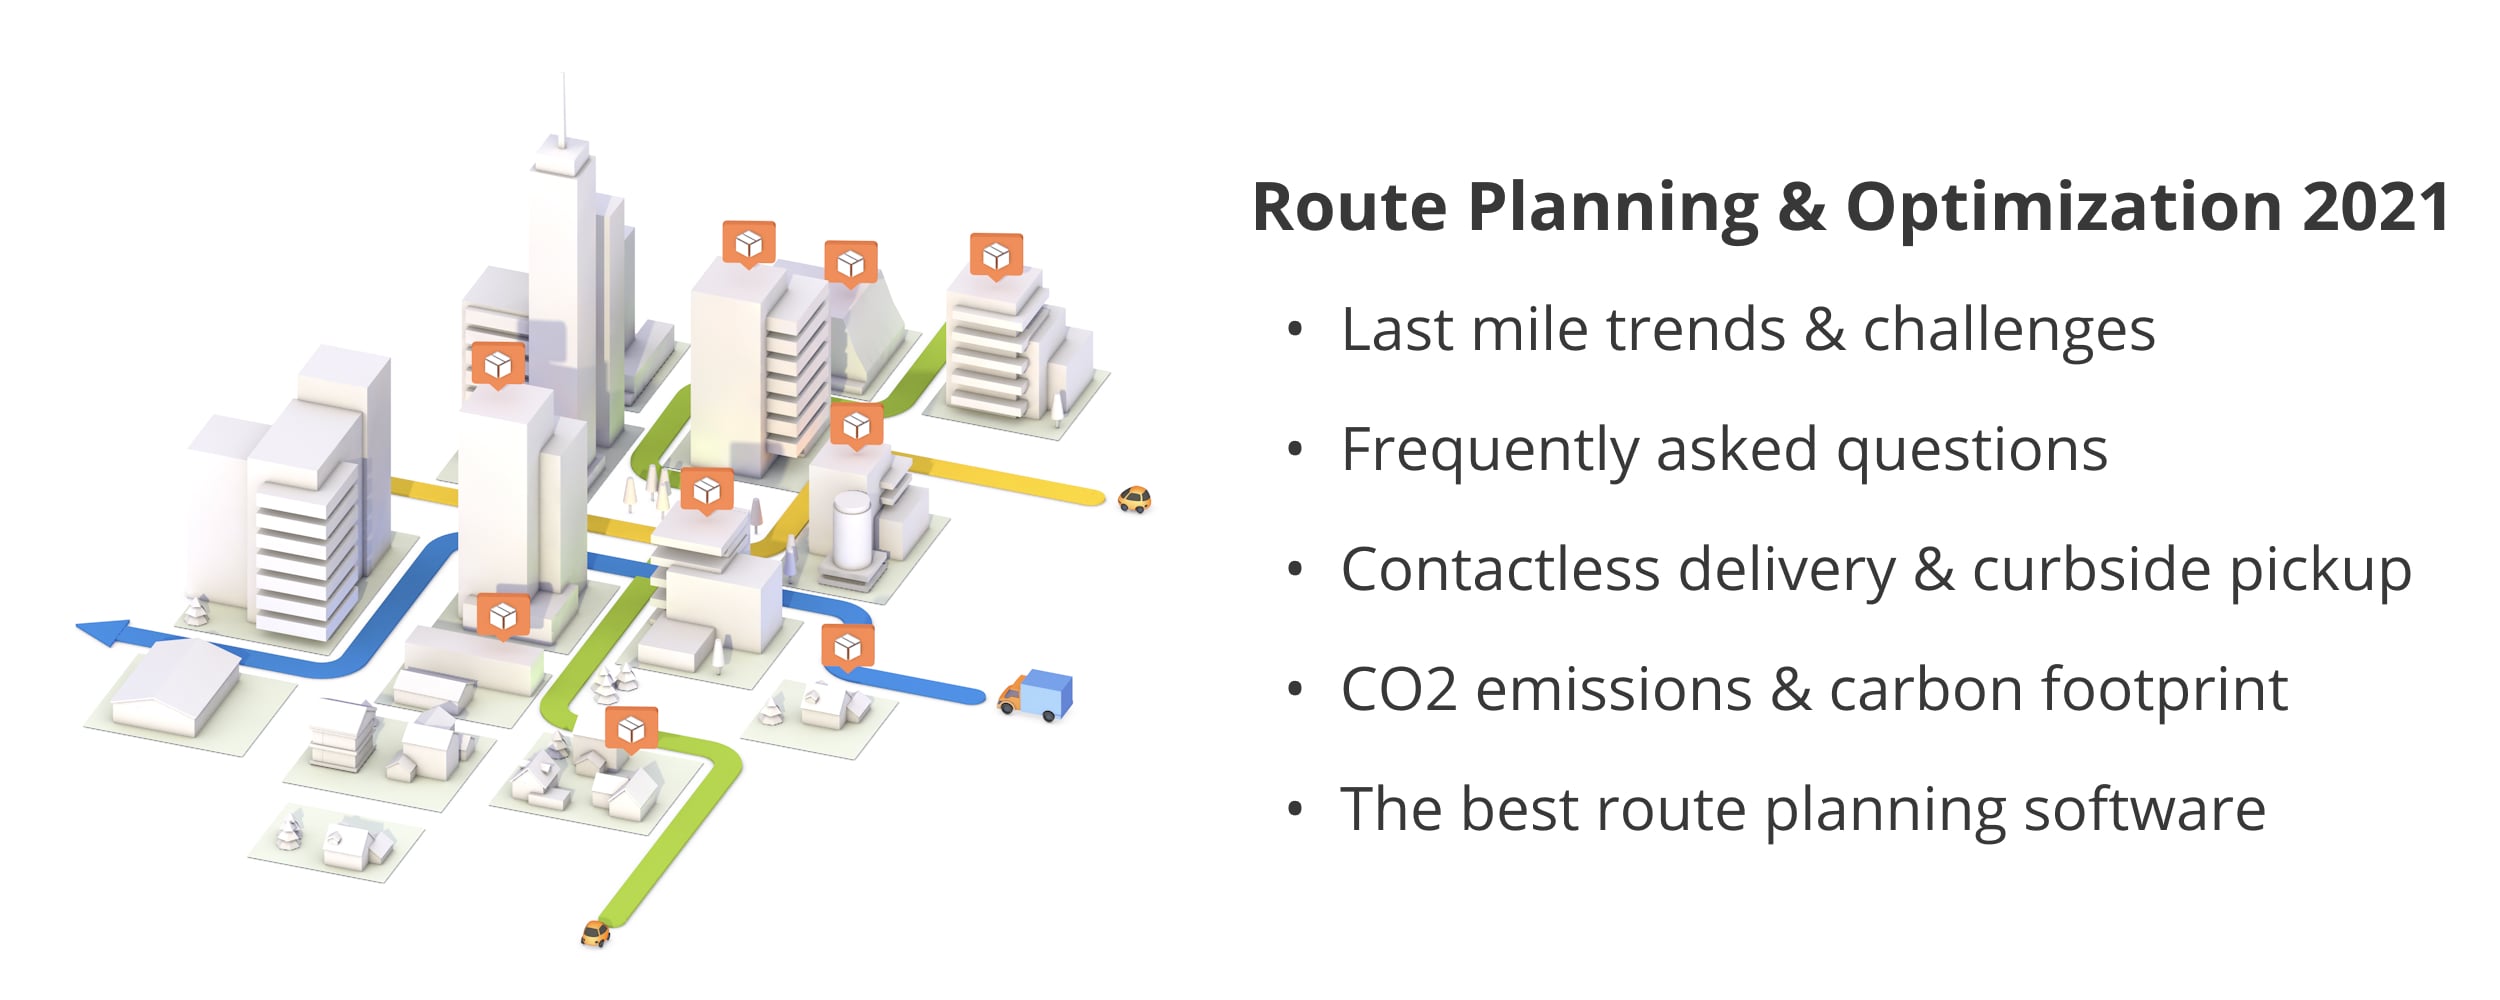 Route planning is mapping multiple addresses and visiting locations in the most optimal sequence.